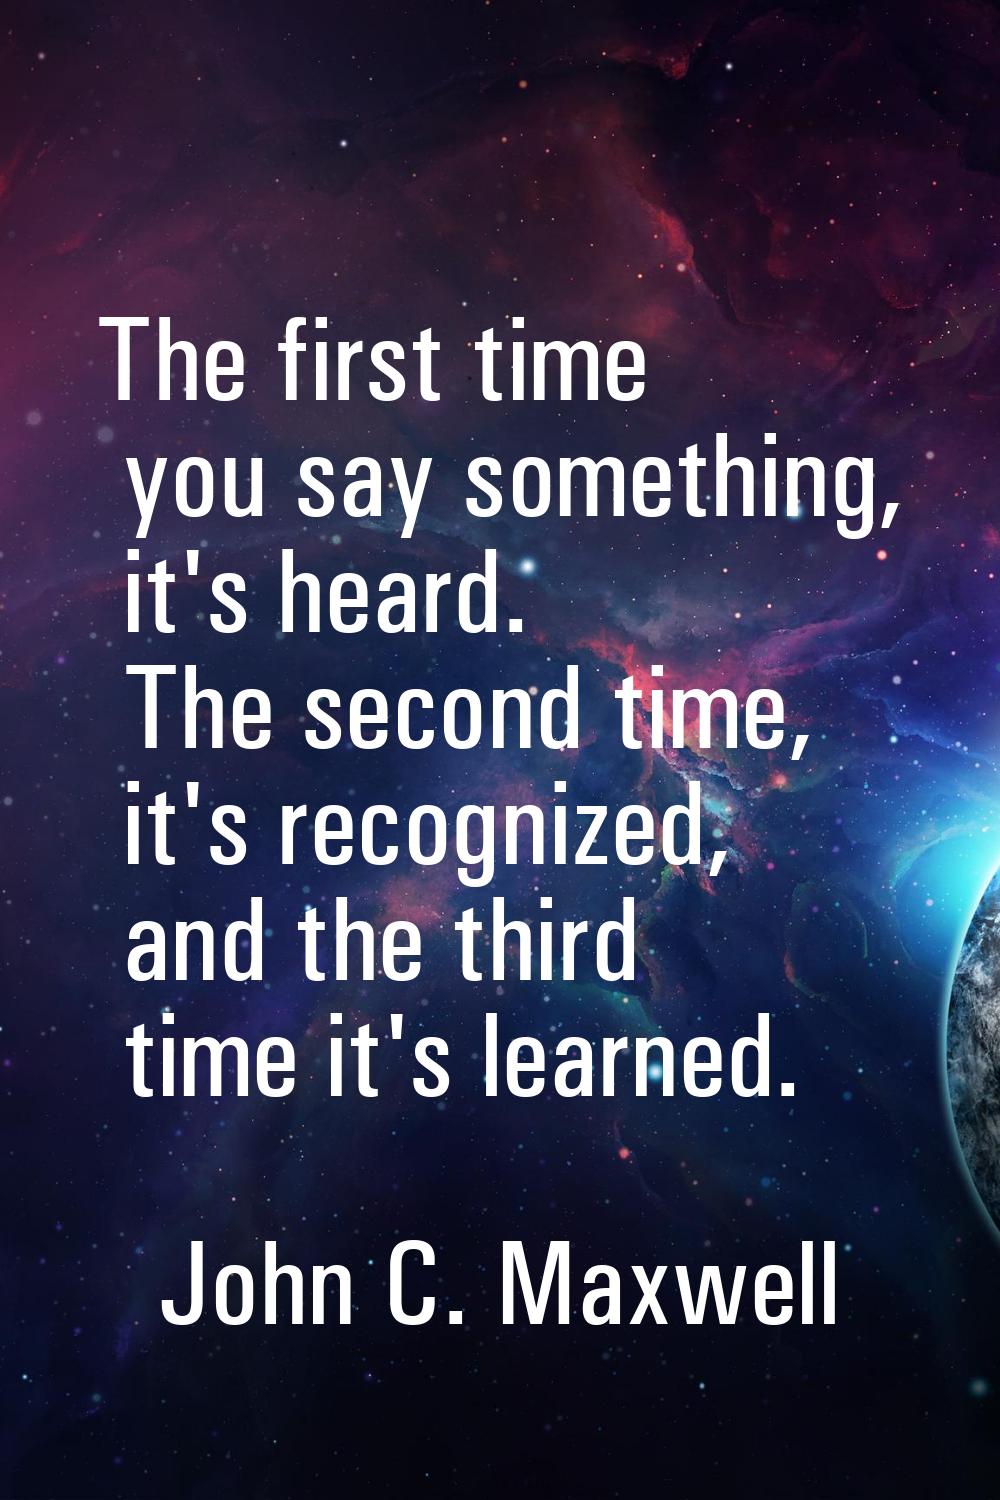 The first time you say something, it's heard. The second time, it's recognized, and the third time 